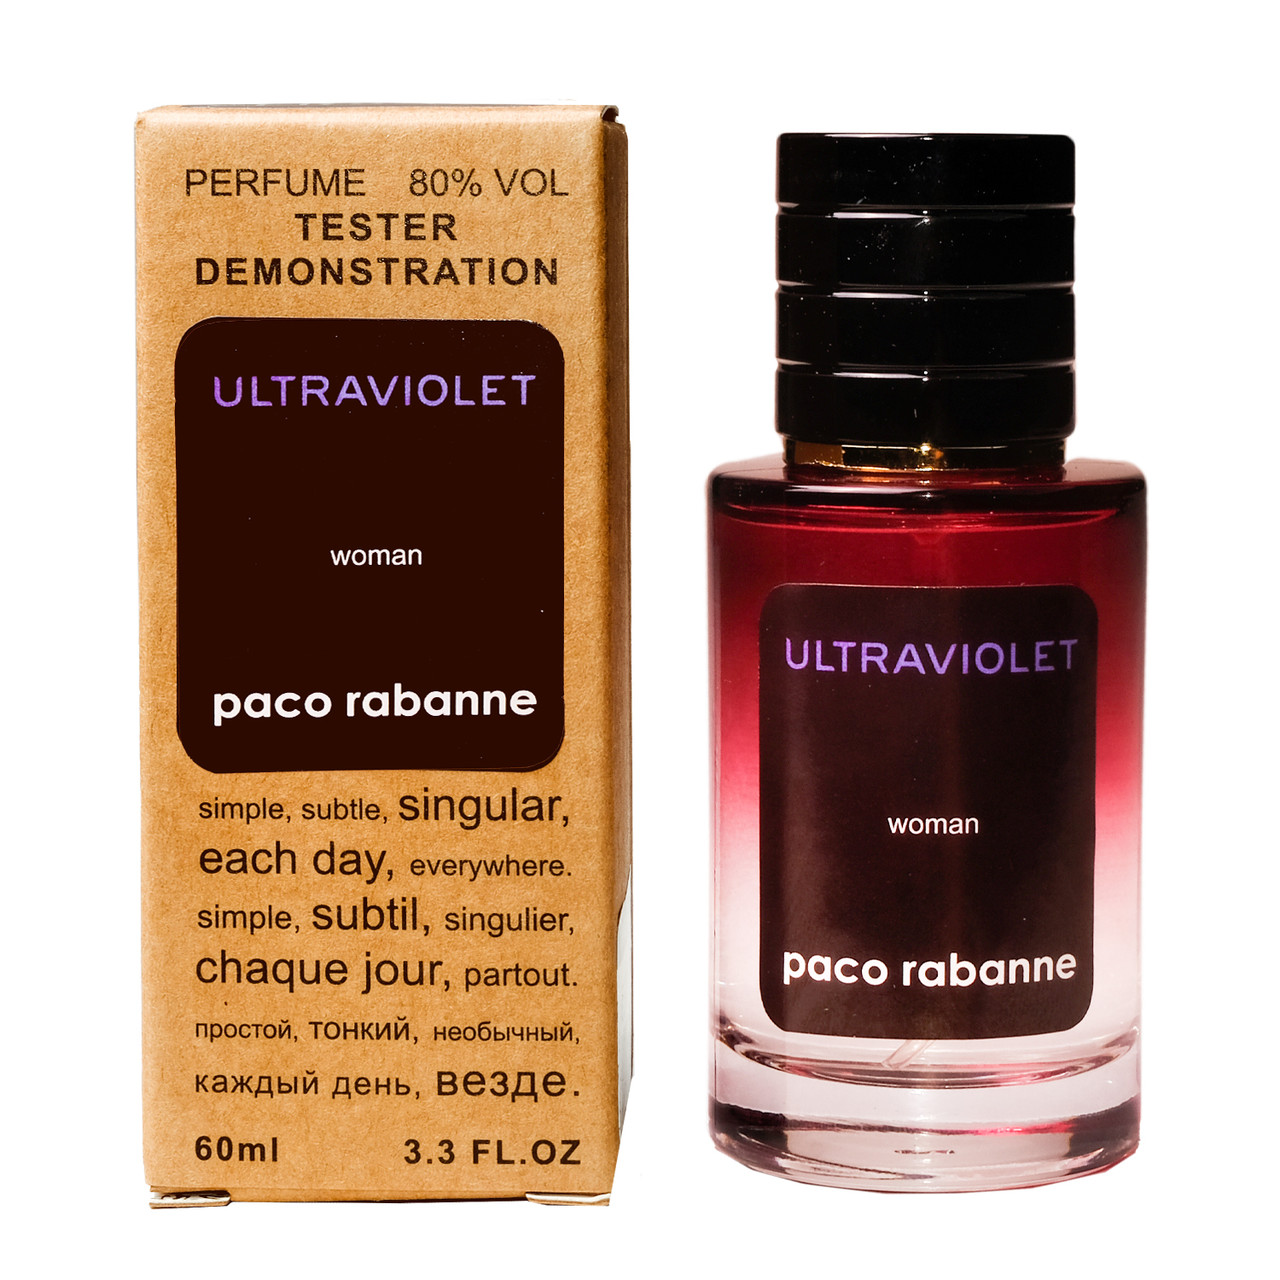 Paco Rabanne Ultraviolet TESTER LUX, 60 мл